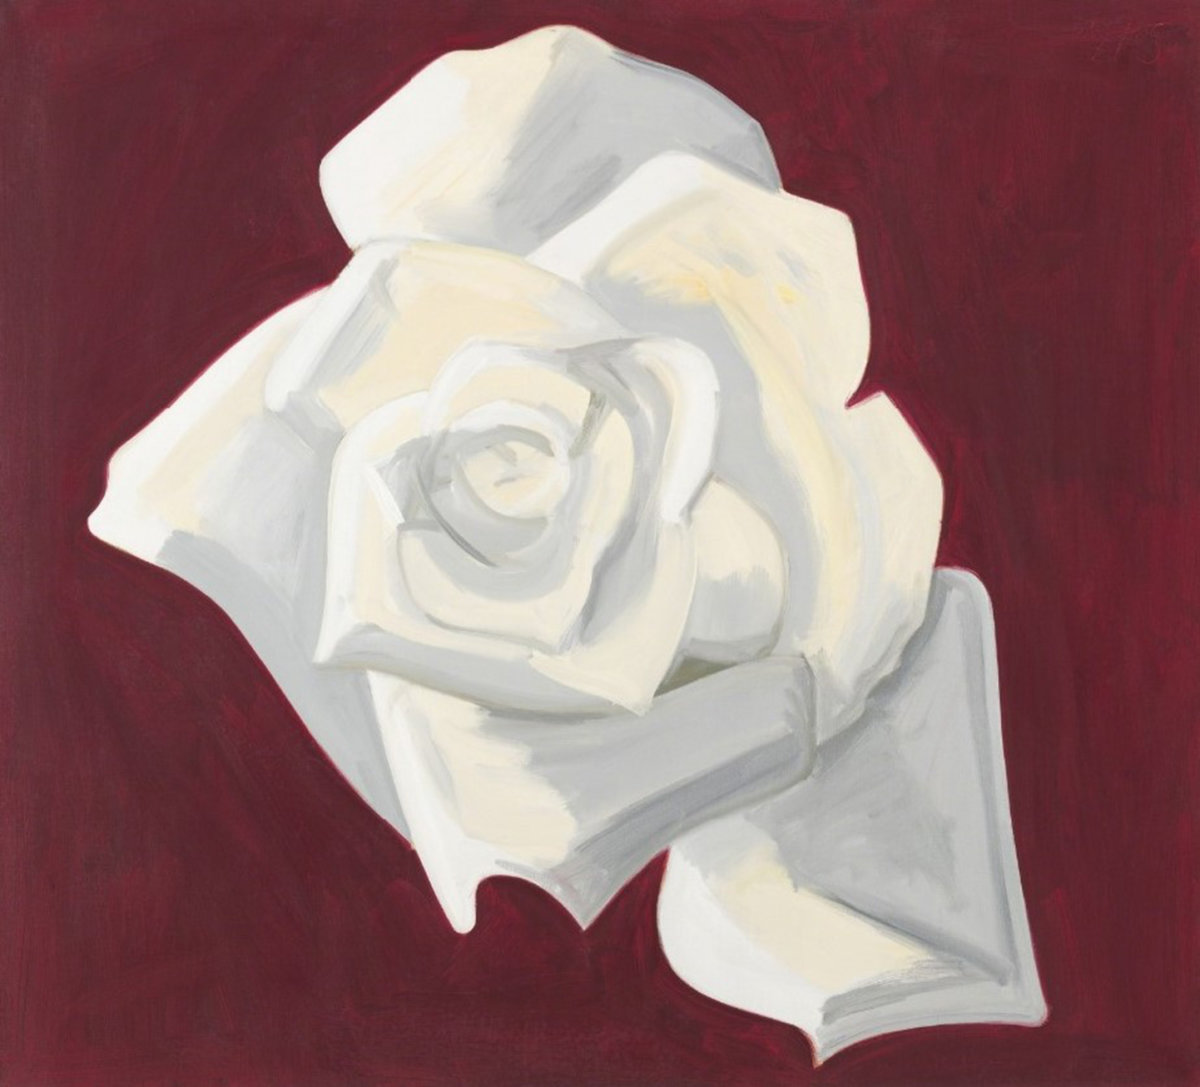 Alex Katz's "Untitled (Rose)" on view at The Drawing Room.